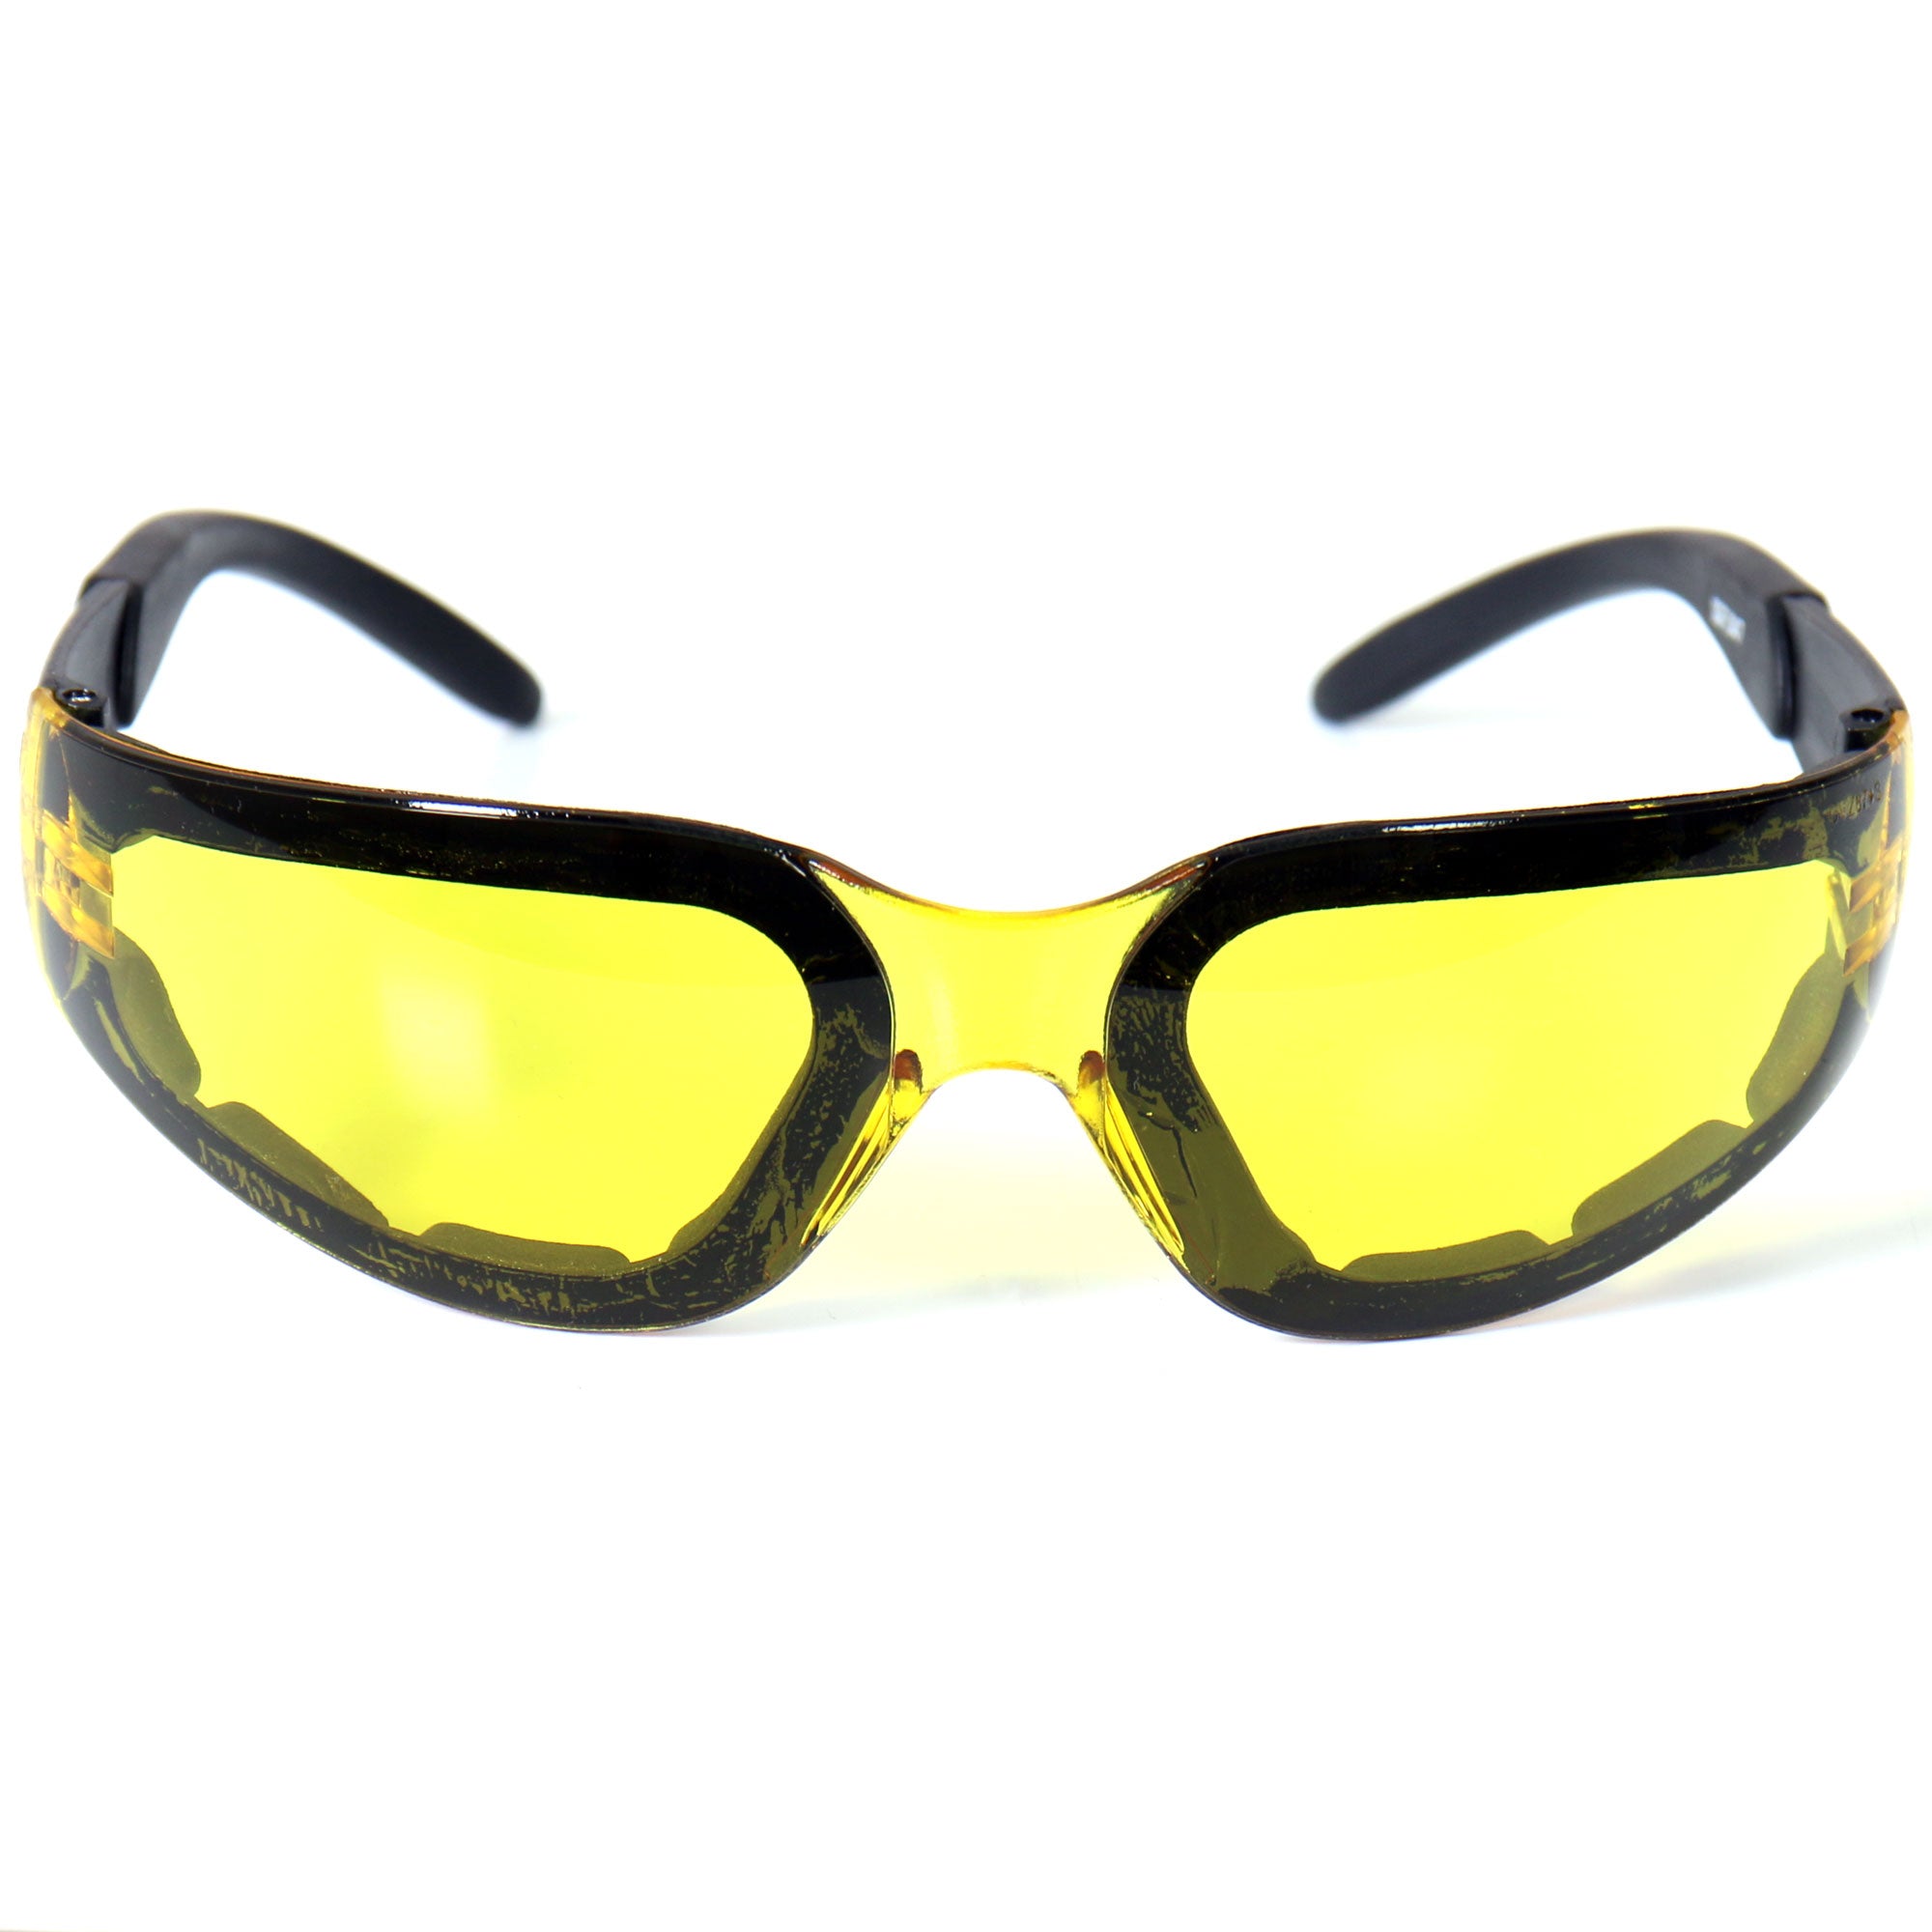 Hot Leathers Rider Sunglasses with Padding and Yellow Lenses